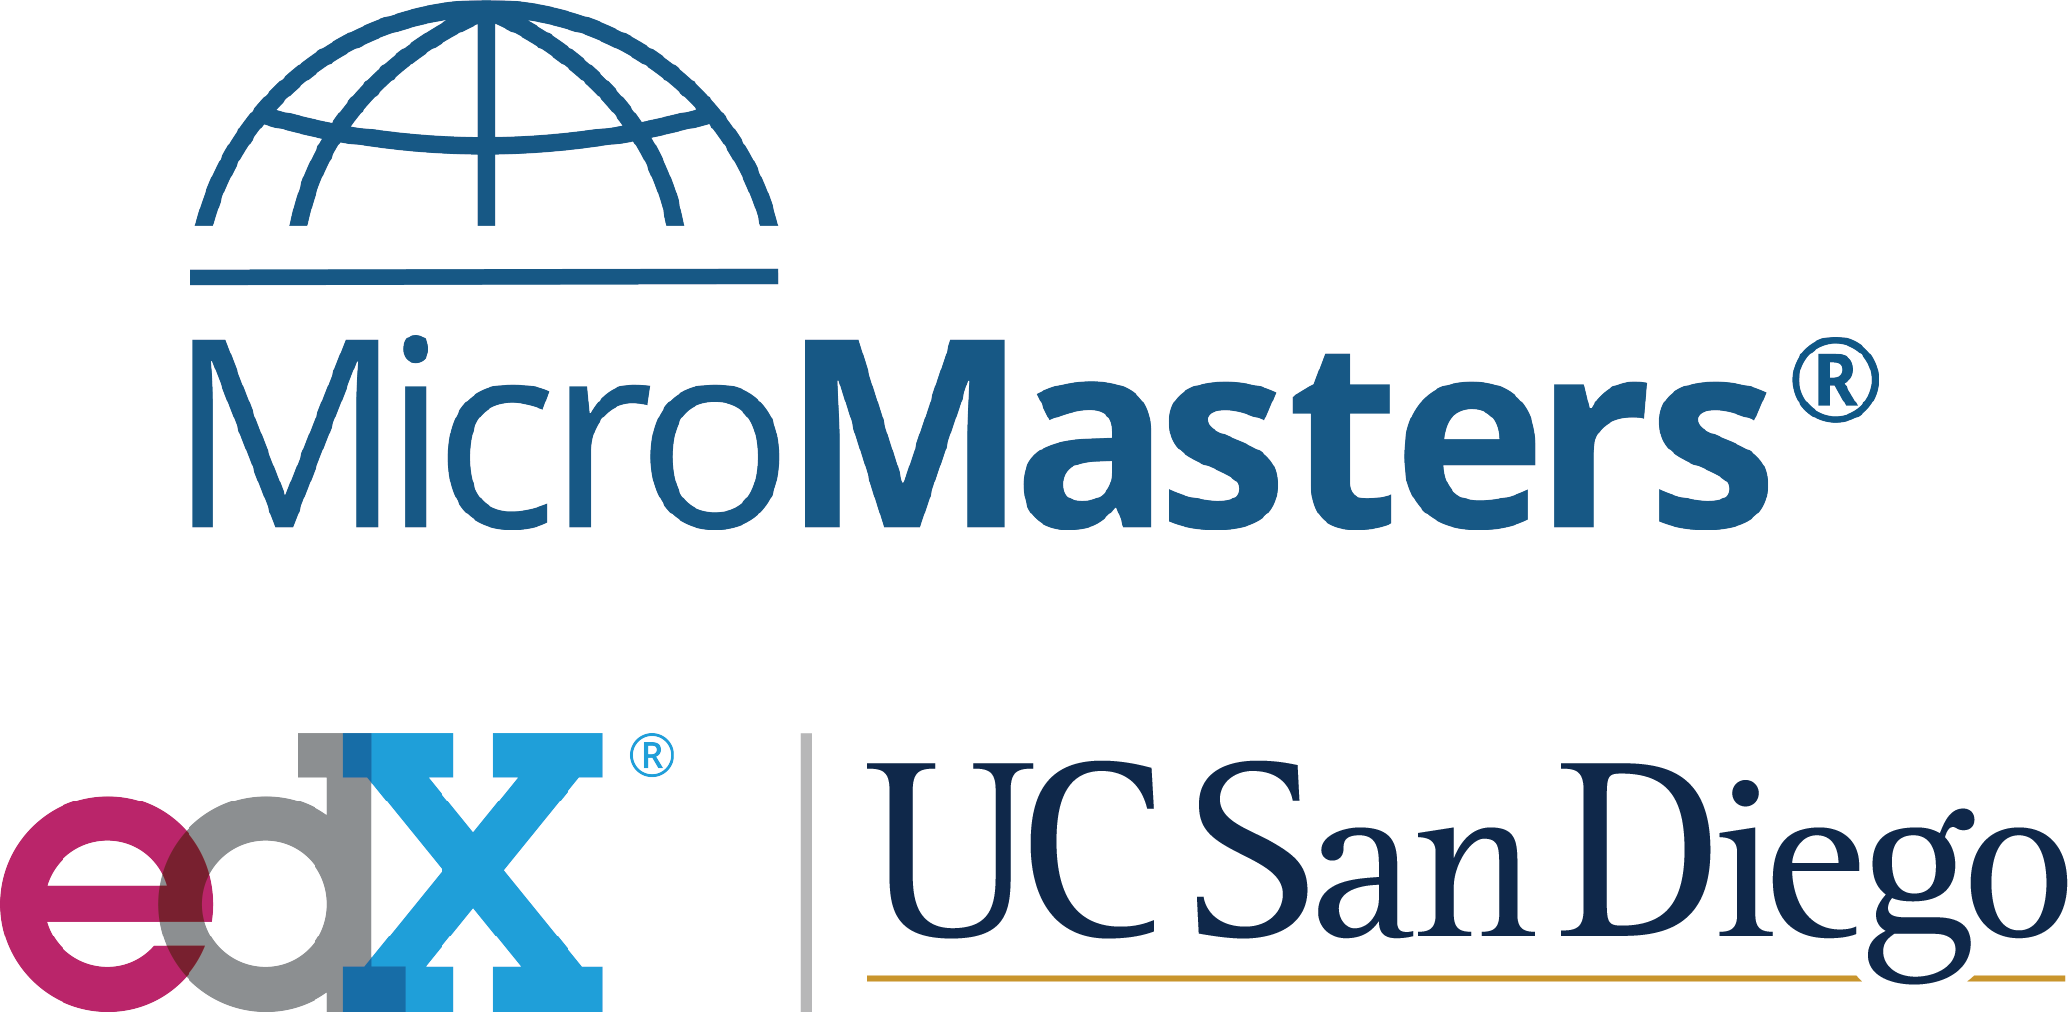 MicroMasters, edX, and UCSD logos. 